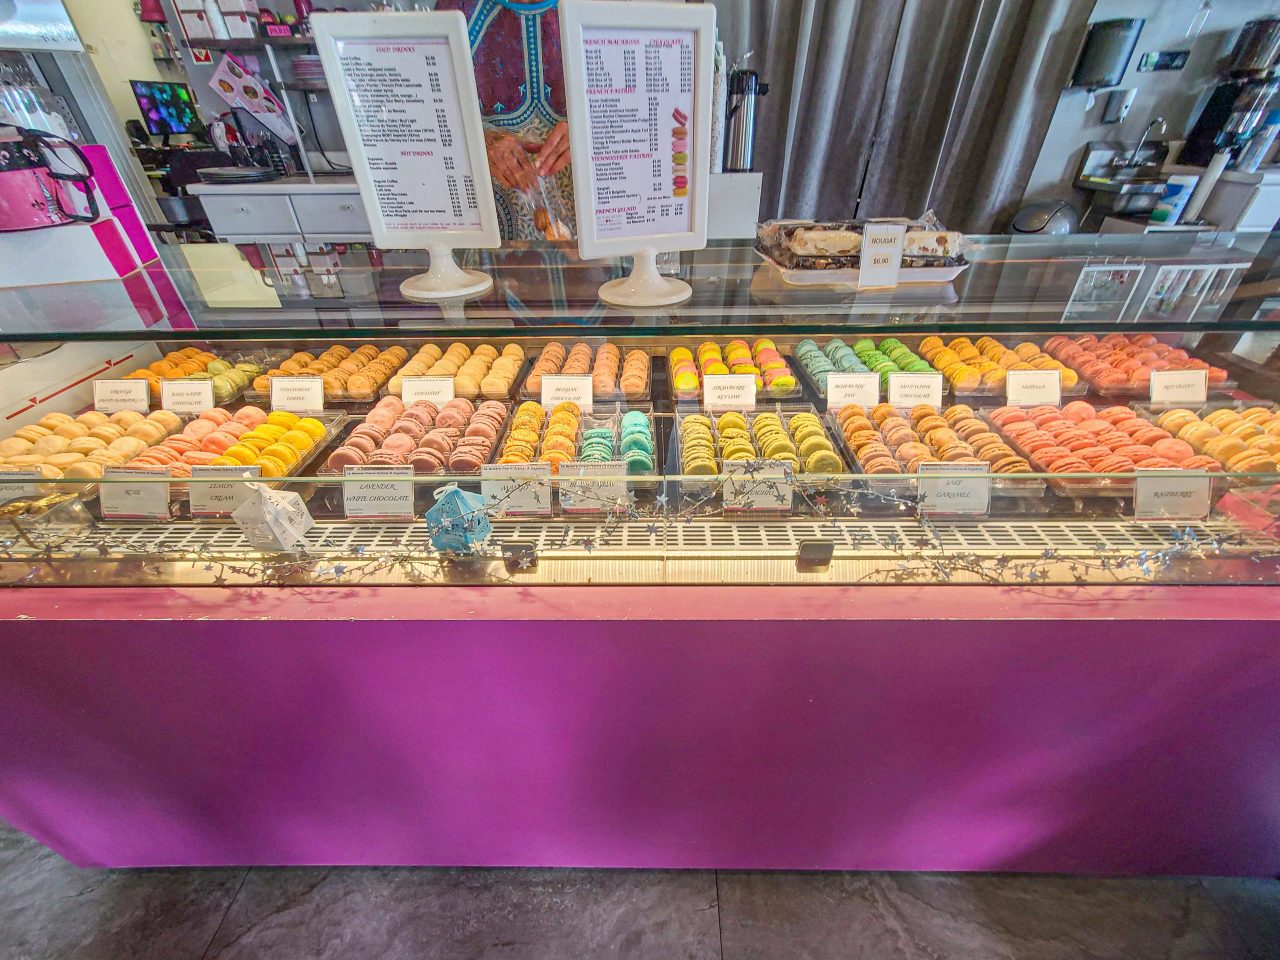 Le Macaron- A stop on the More than Chocolate Food Tour